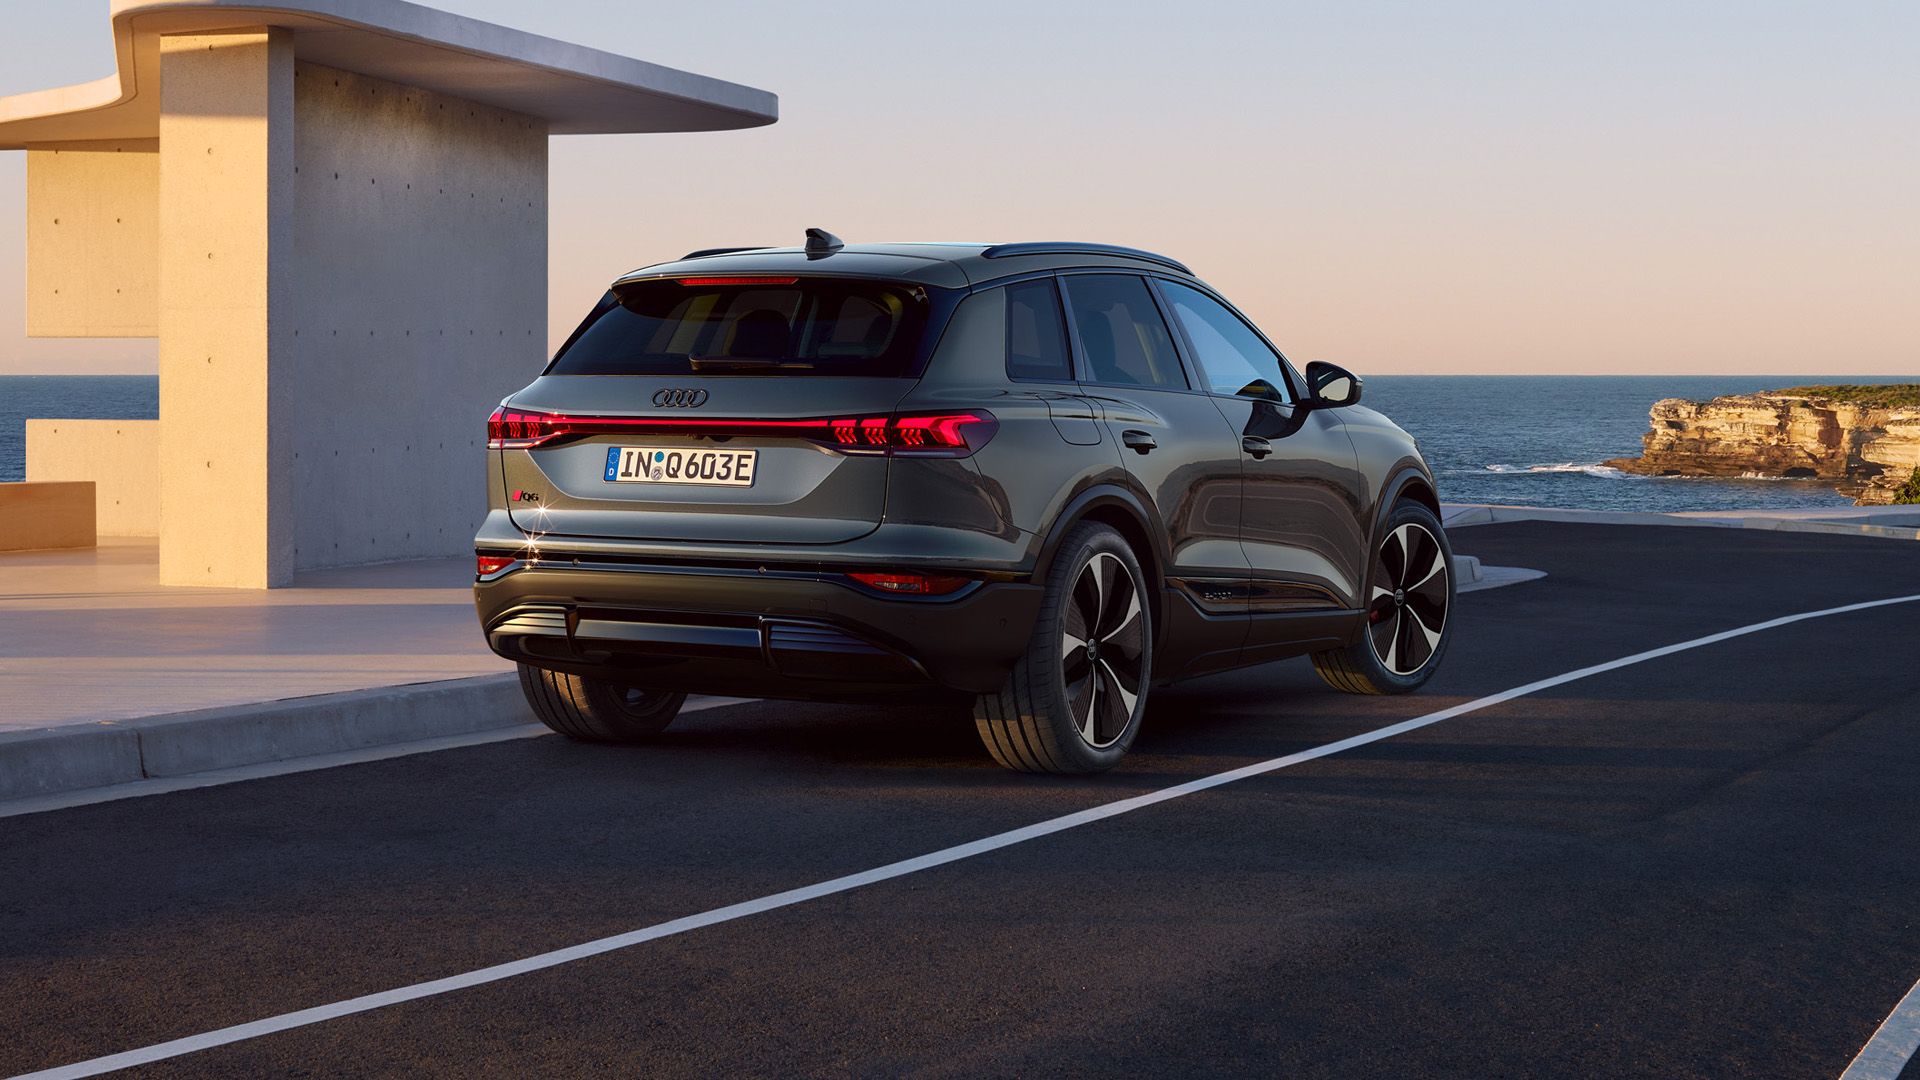 Rear view of the Audi Q6 e-tron at the charging station.